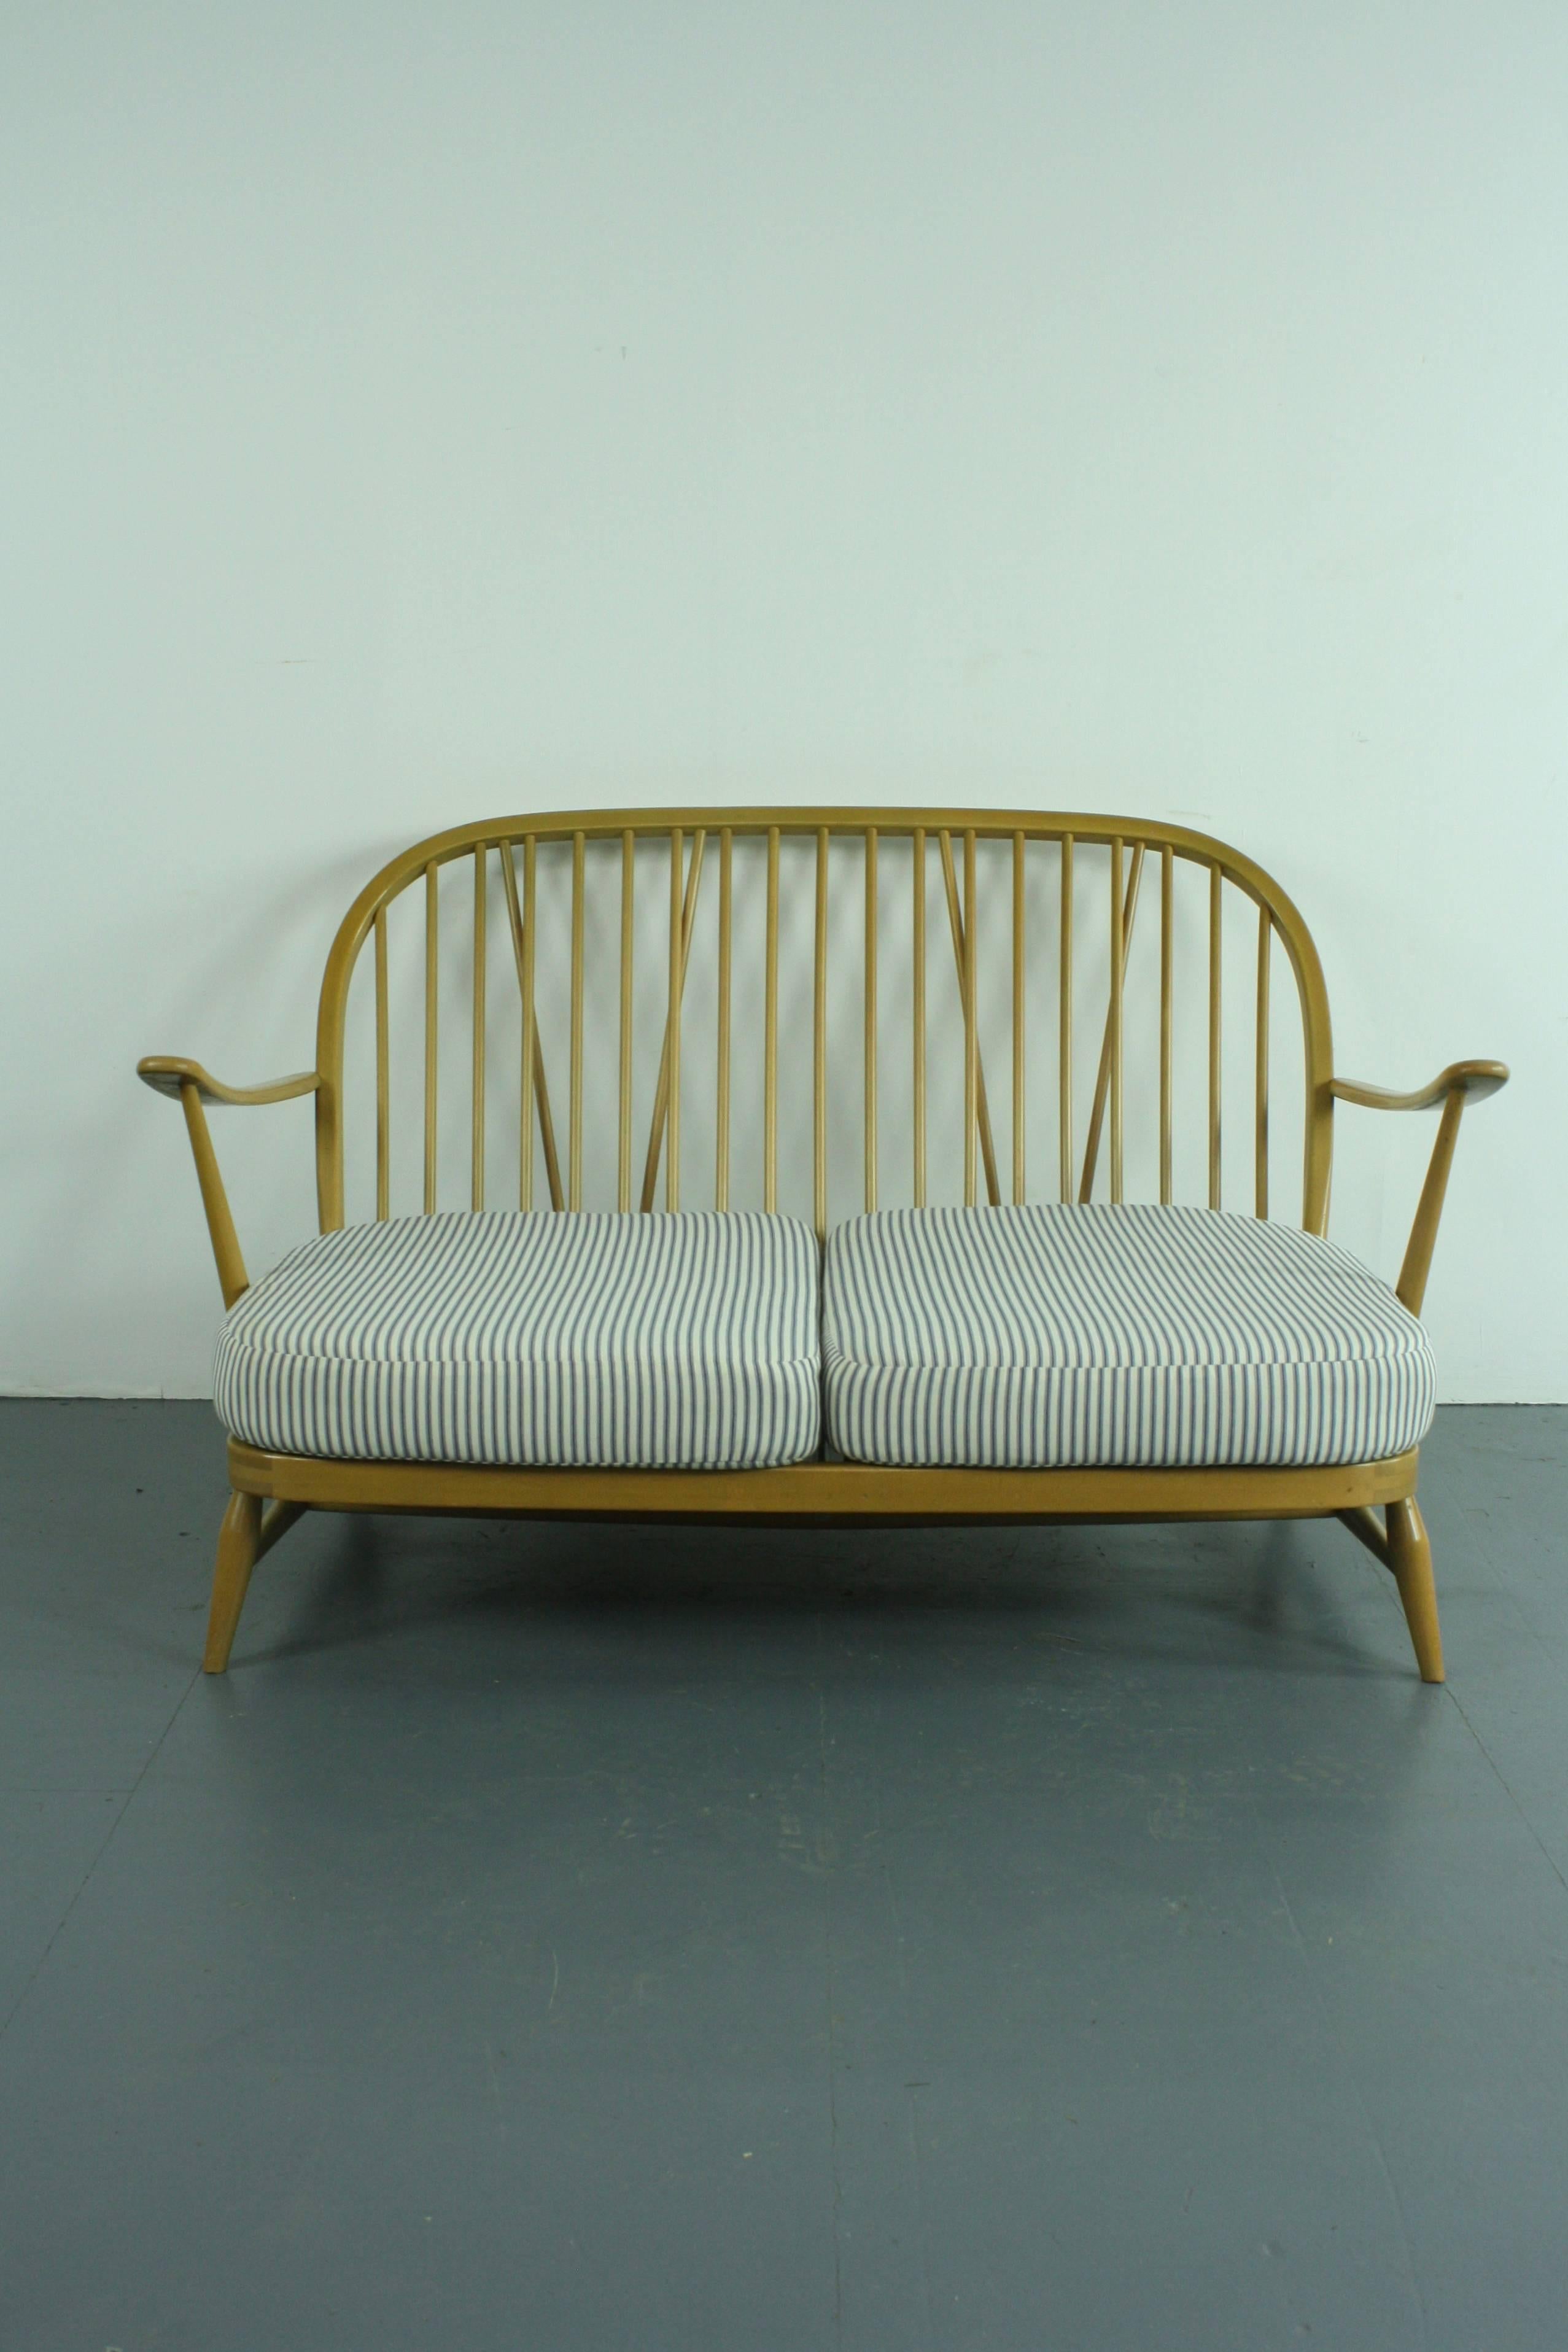 English Refurbished Vintage Ercol Windsor Two-Seat Sofa Upholstered in French Ticking For Sale